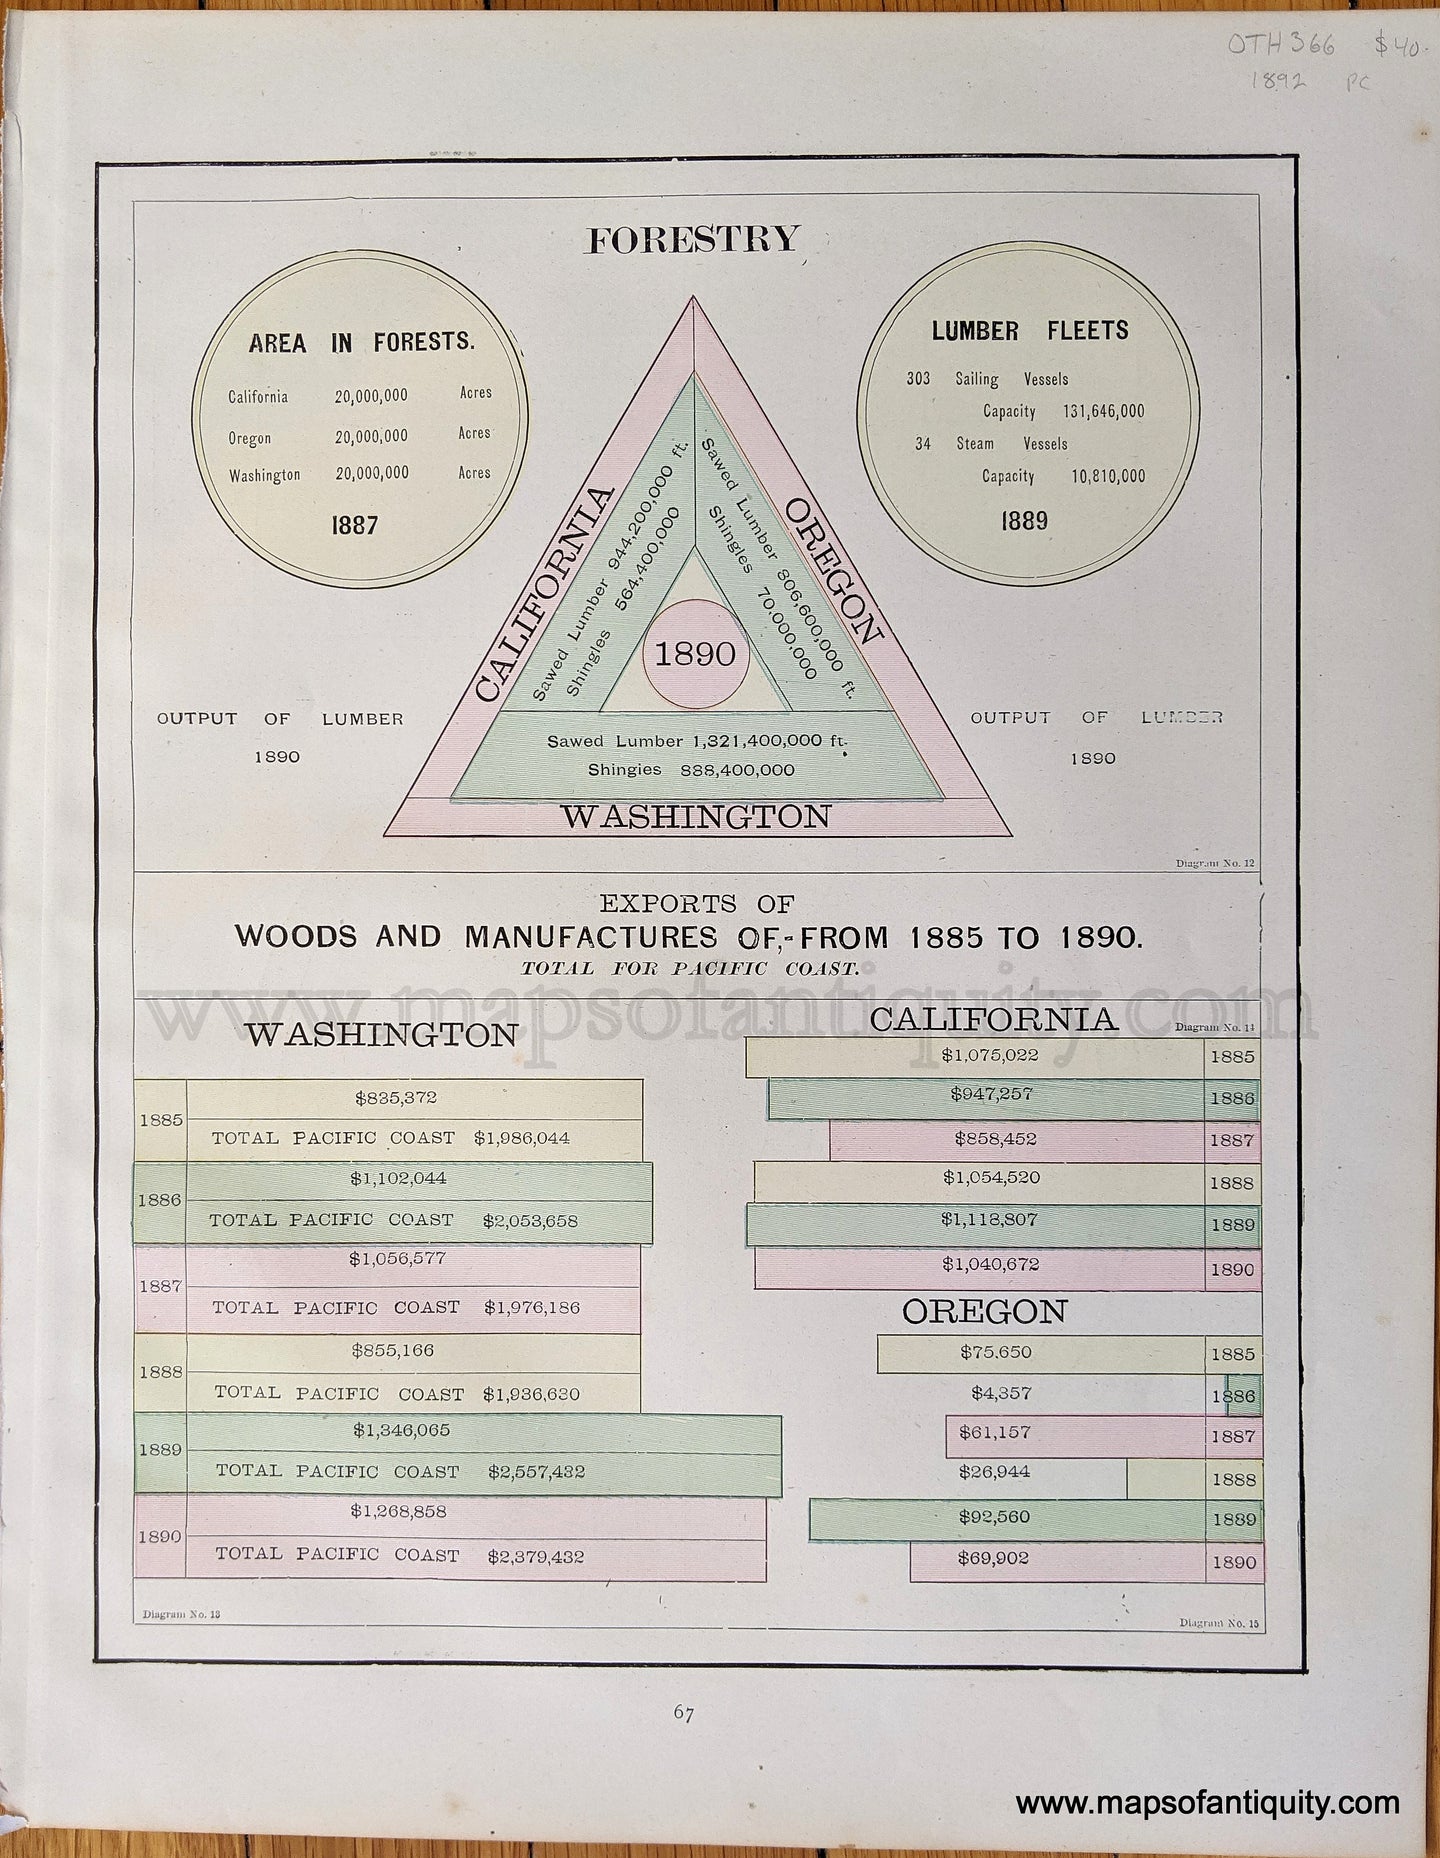 Genuine-Antique-Printed-Color-Comparative-Chart-Forestry-Exports-of-Woods-and-Manufactures-of--from-1885-to-1890-Total-for-Pacific-Coast;-verso:-Animal-Products-Mineral-Products-Products-from-the-Vegetable-Kingdom-Comparative--1892-Home-Library-&-Supply-Association-Maps-Of-Antiquity-1800s-19th-century